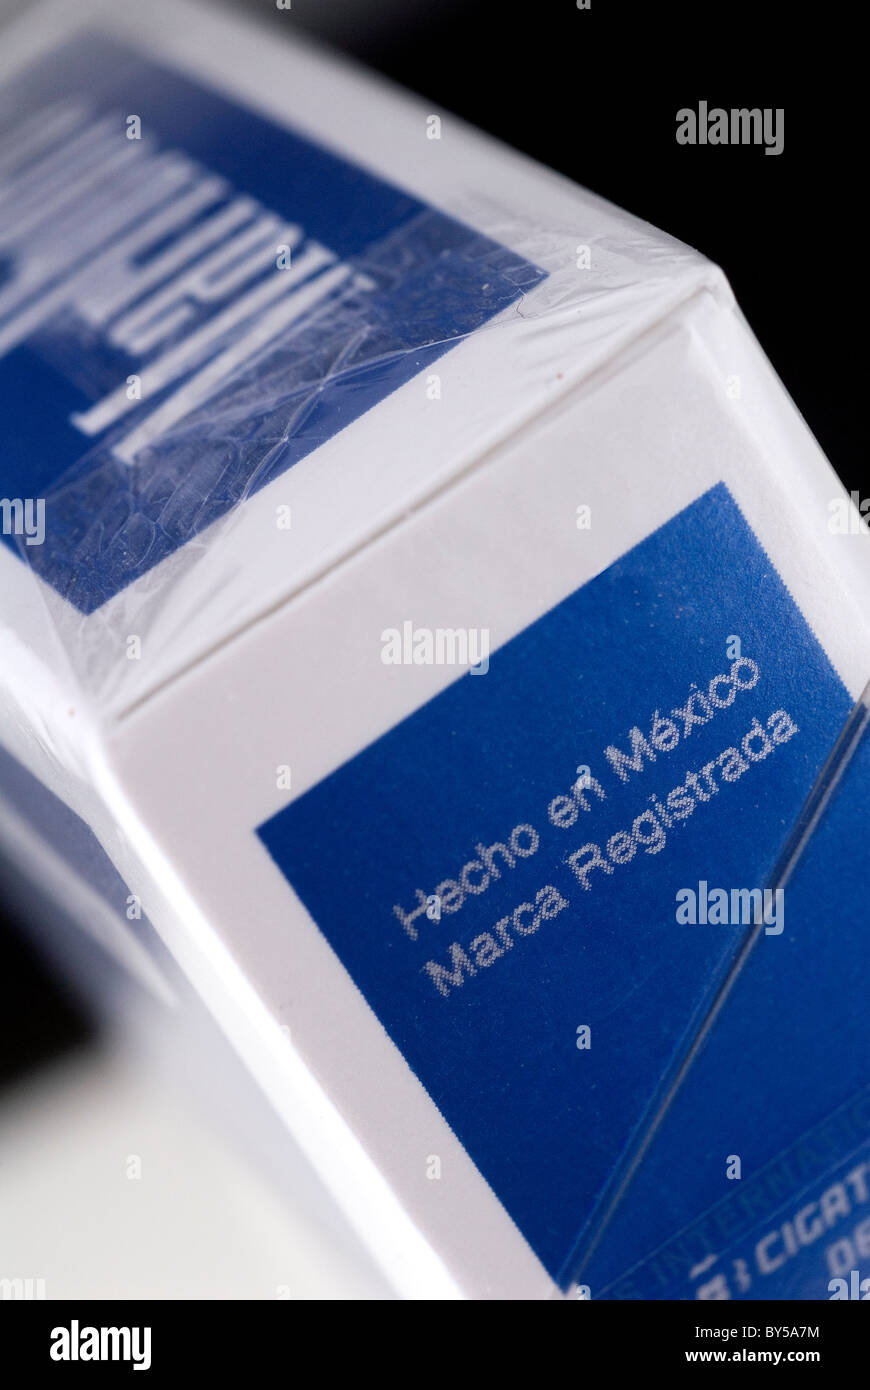 Close up of a Marlboro pack of cigarettes. The blue edition sold in Mexico. Stock Photo